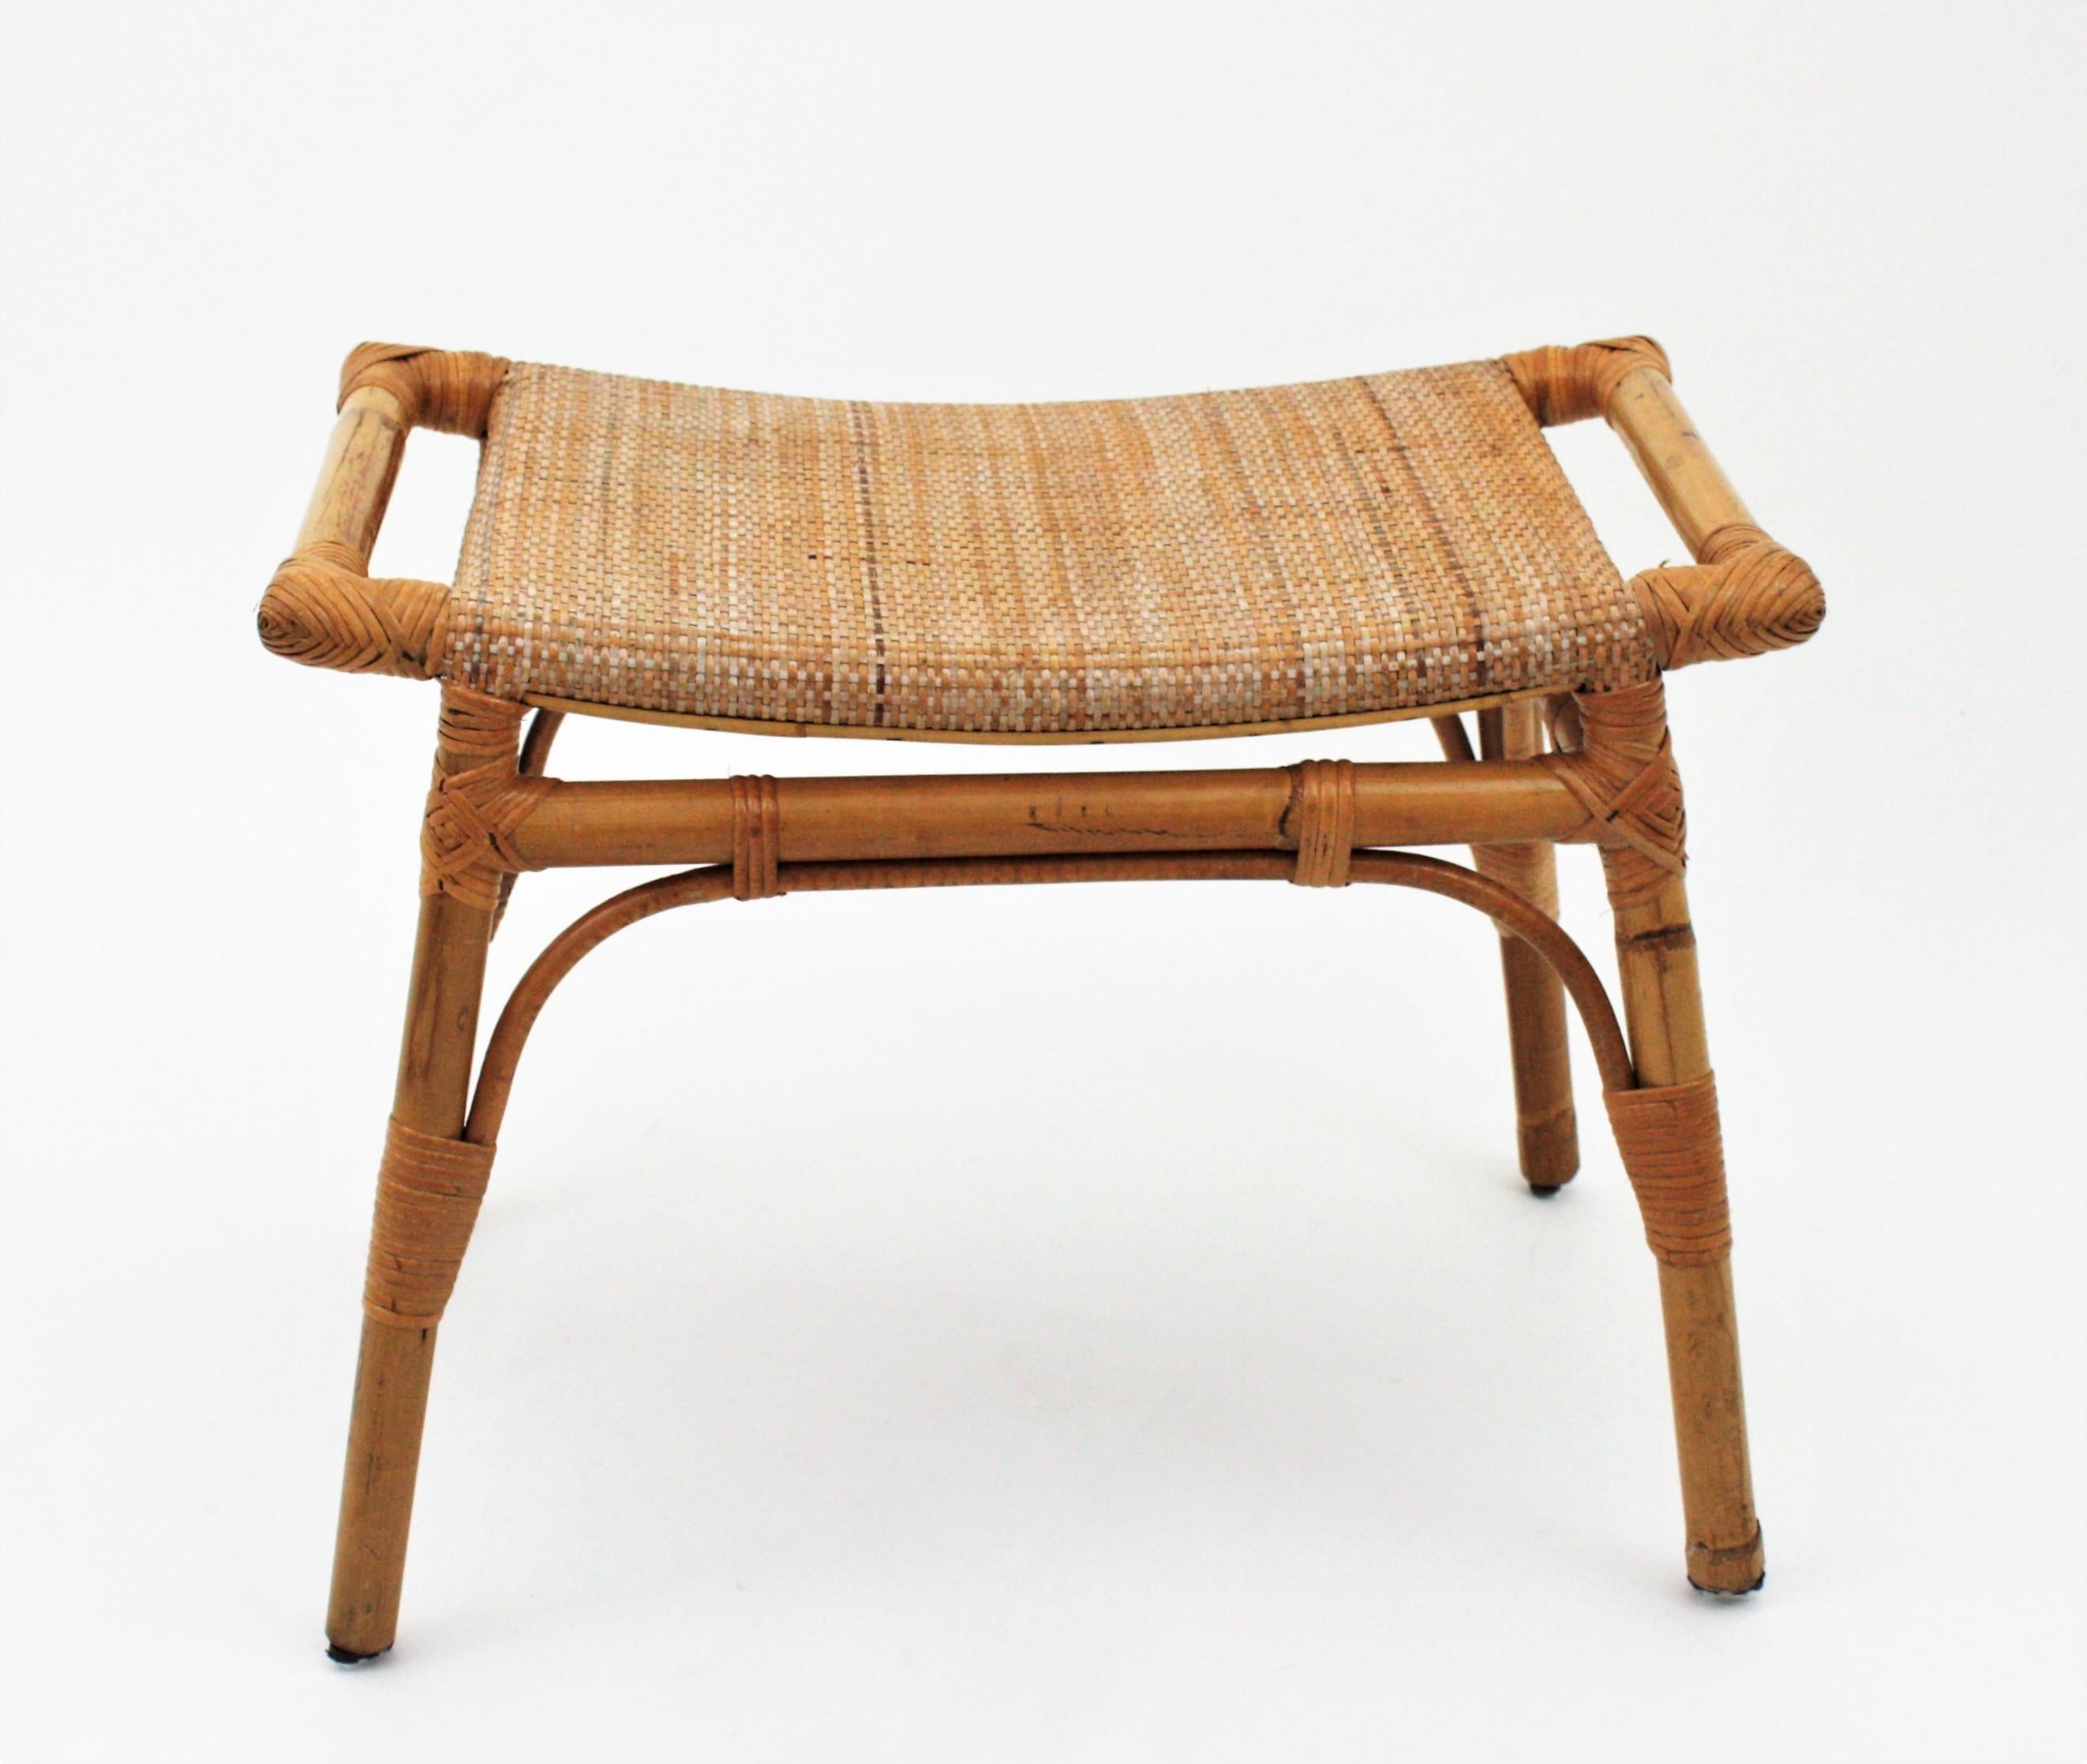 Mid-Century Modern Bamboo Stool, Ottoman or Bench with Cane Seat